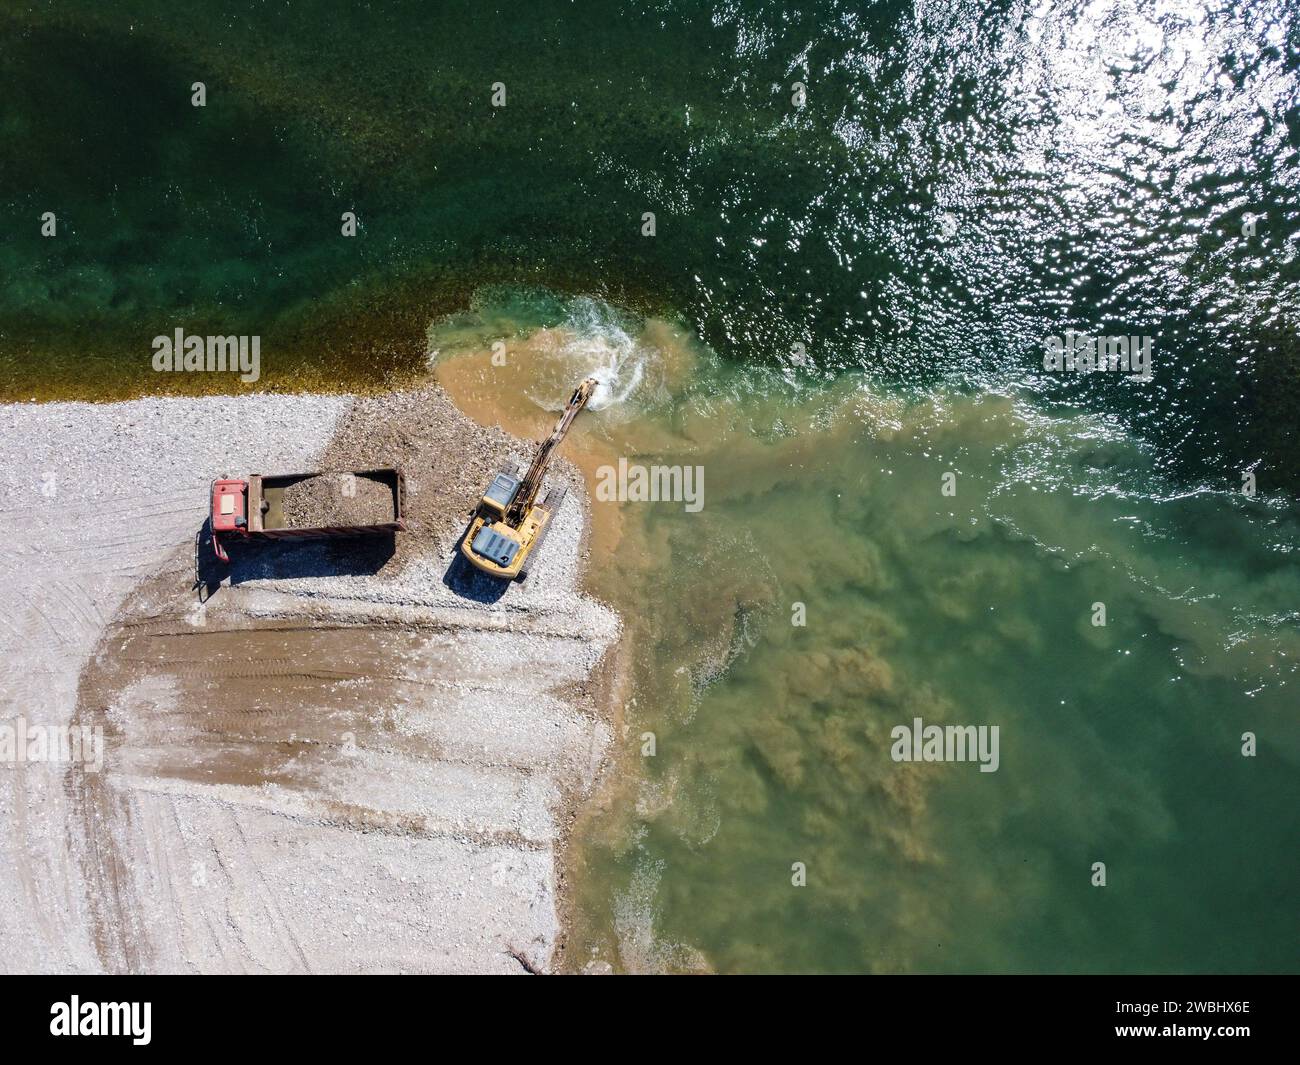 Excavator digging and loading sand into dump truck at river bank. Heavy machinery working at sand quarry. Aerial drone view of digger and truck. Stock Photo